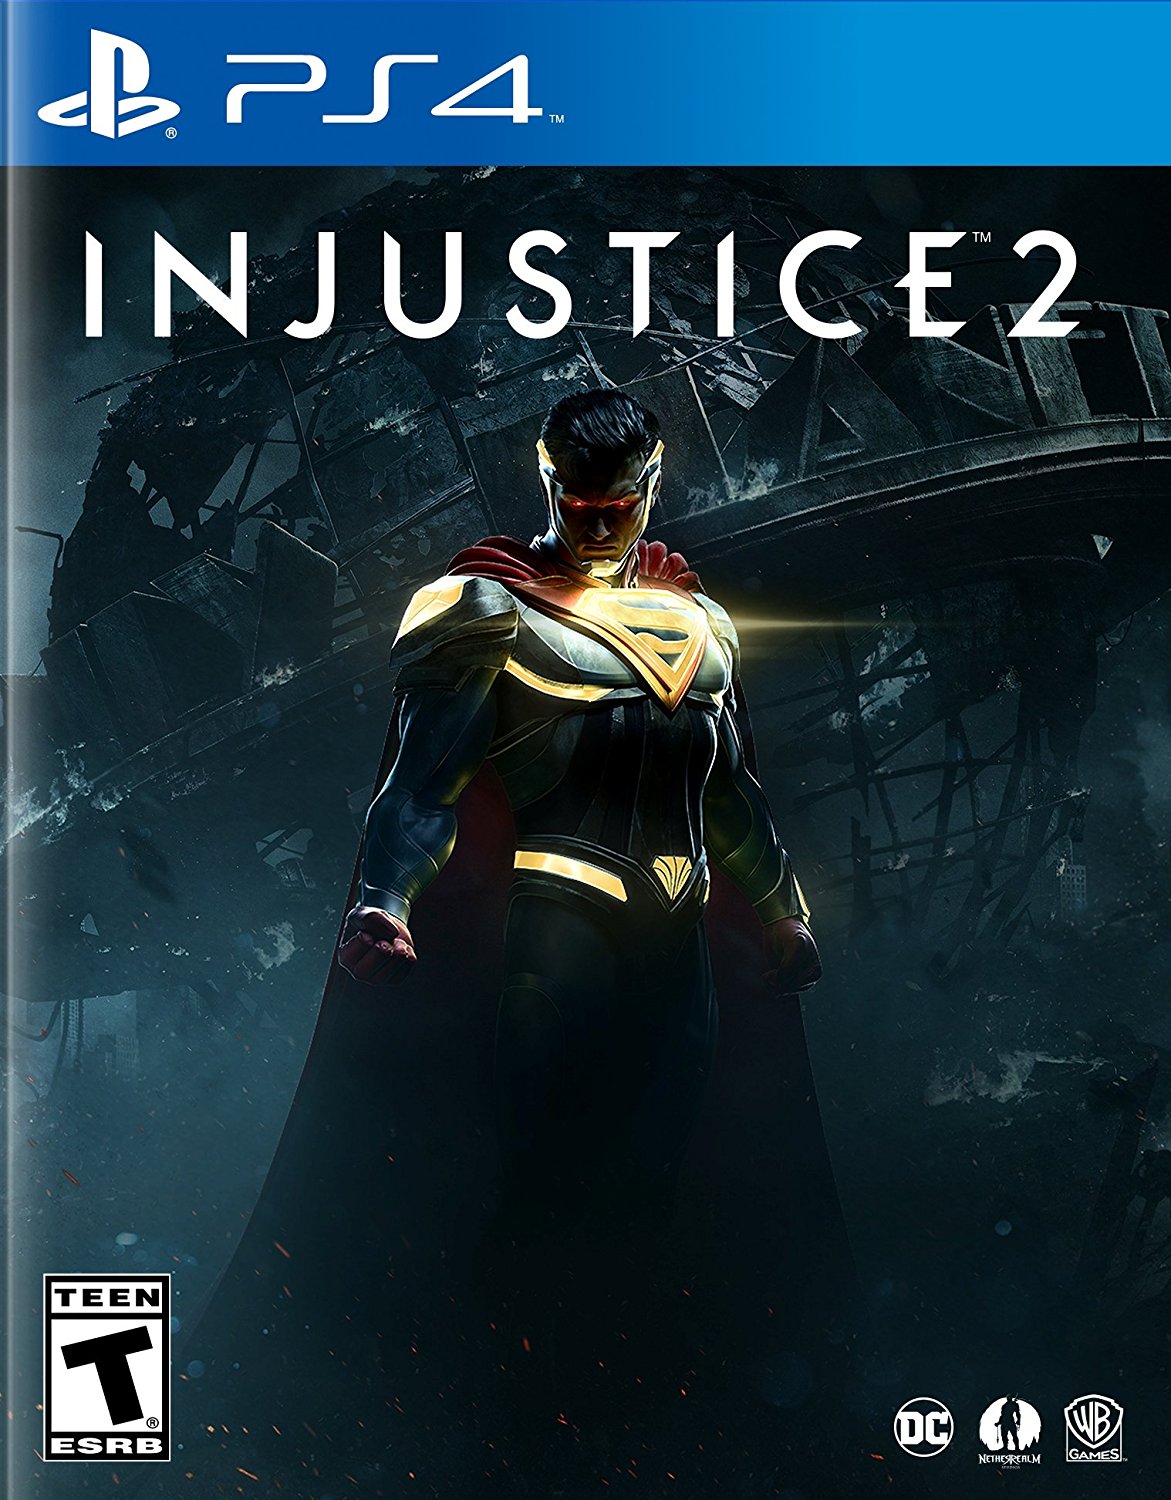 are they making injustice 3